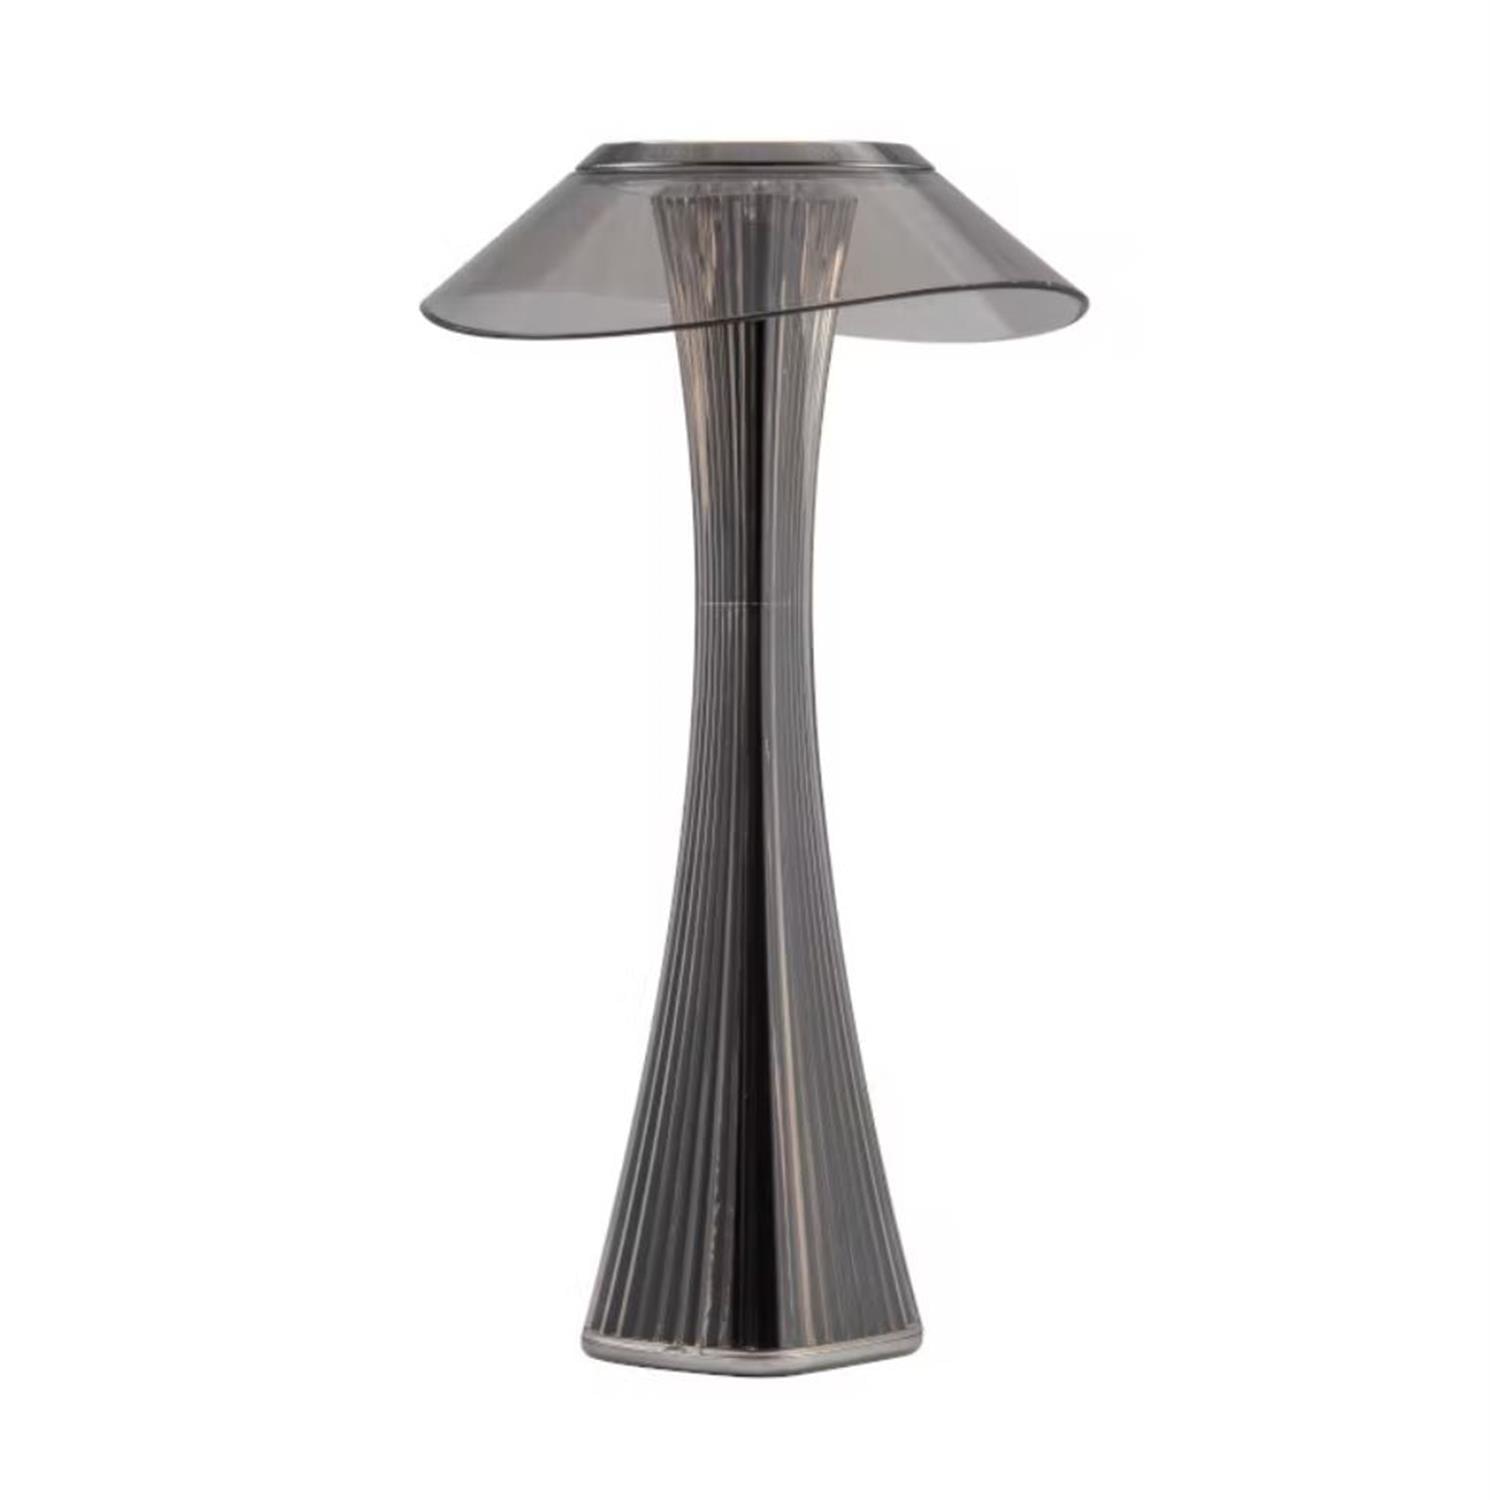 Le Coq Anthracite-coloured pleated 'Astreo' LED table lamp